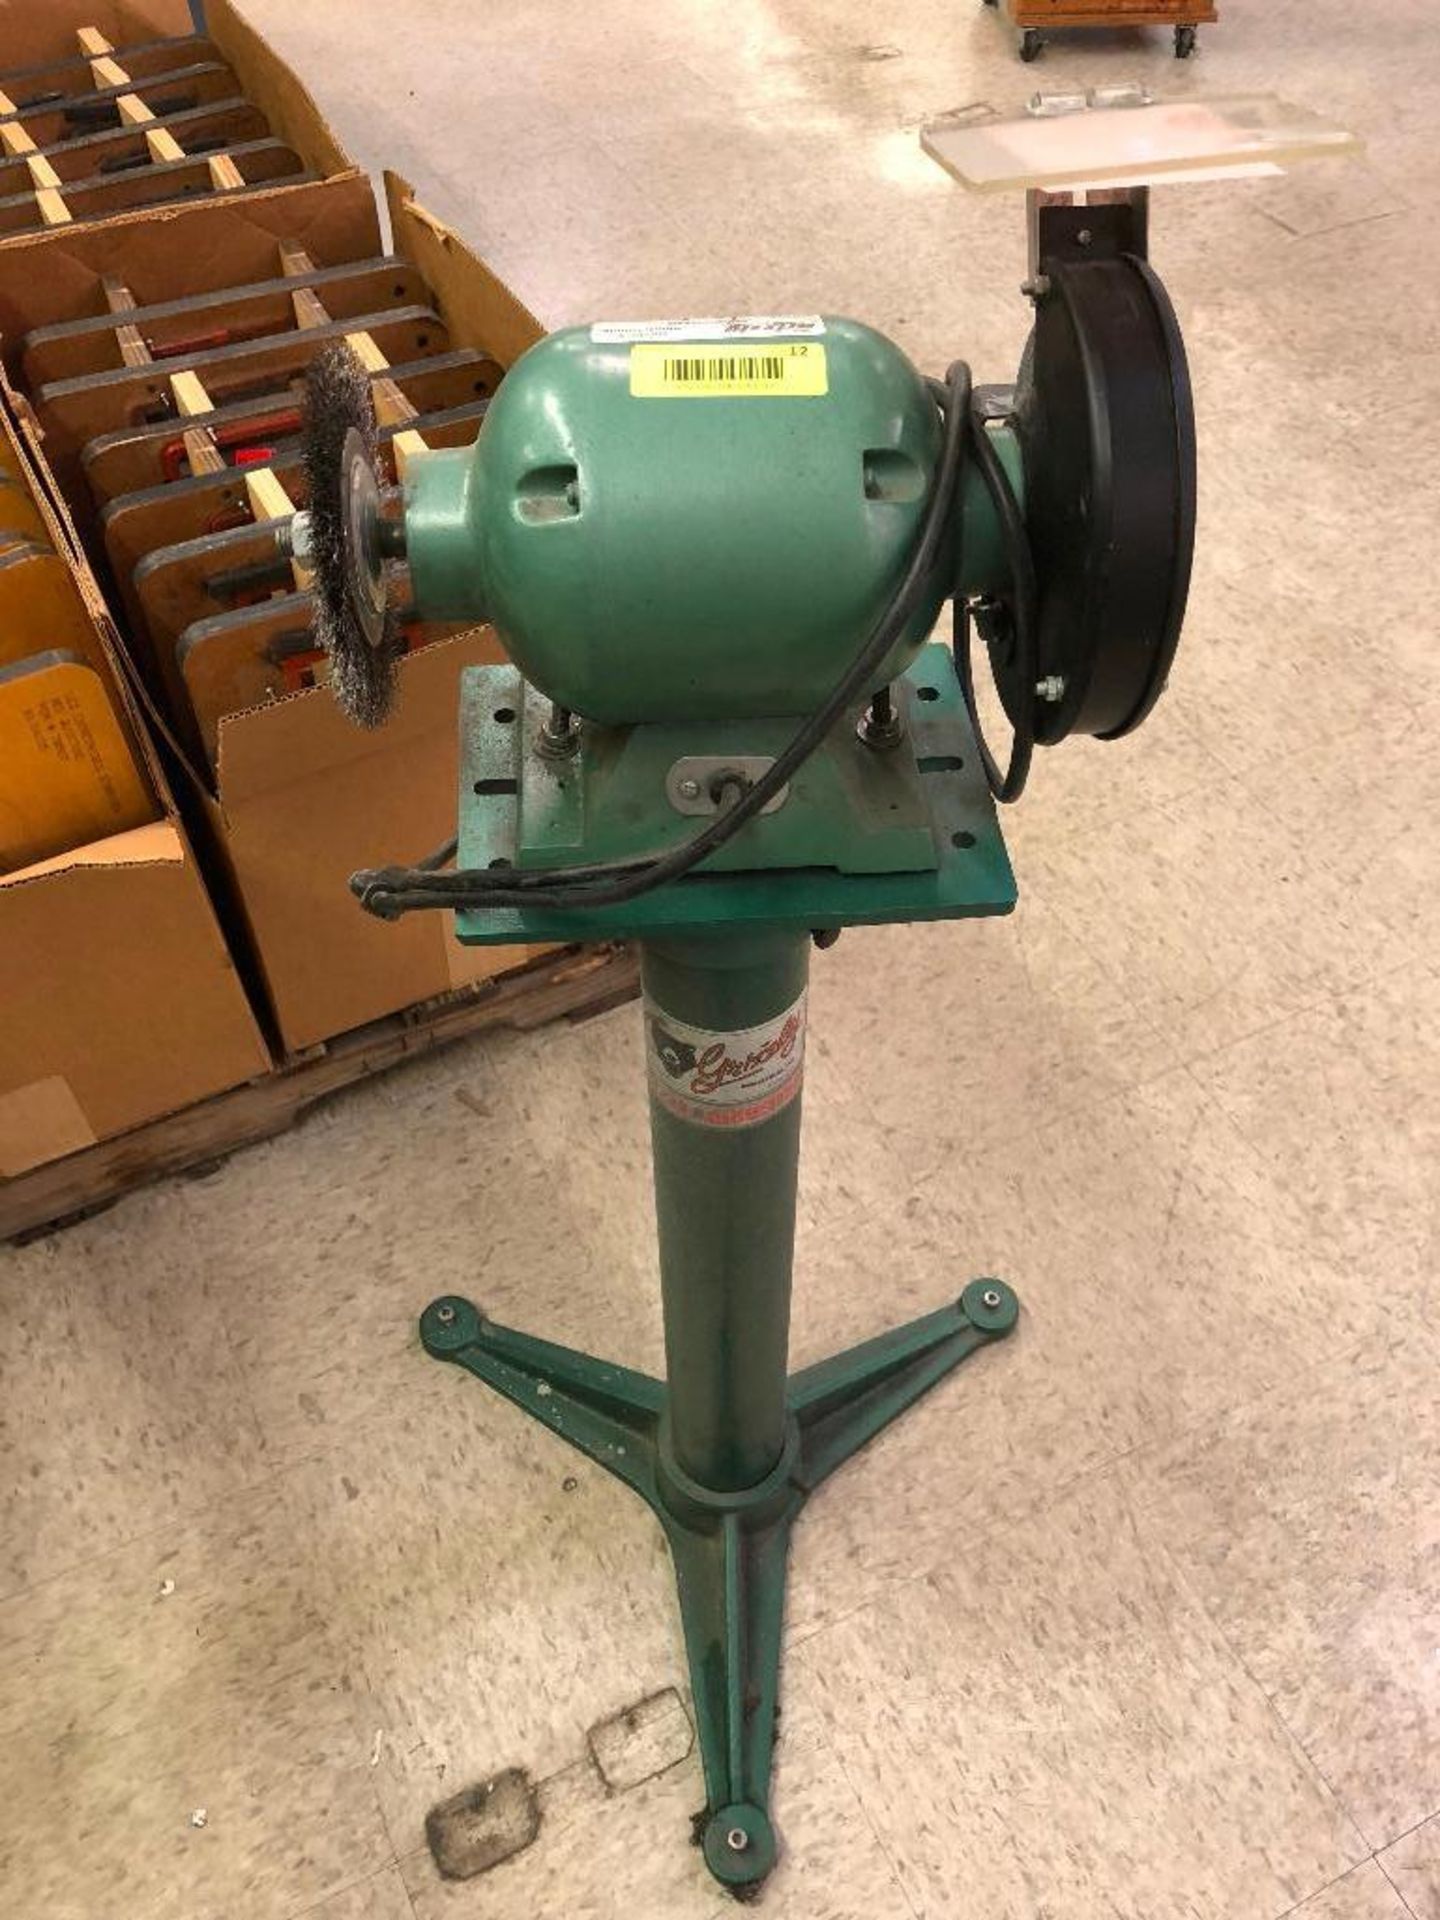 DESCRIPTION: GRIZZLY 6" BENCH GRINDER W/ PEDESTAL BASE. BRAND / MODEL: GRIZZLY G9717 ADDITIONAL INFO